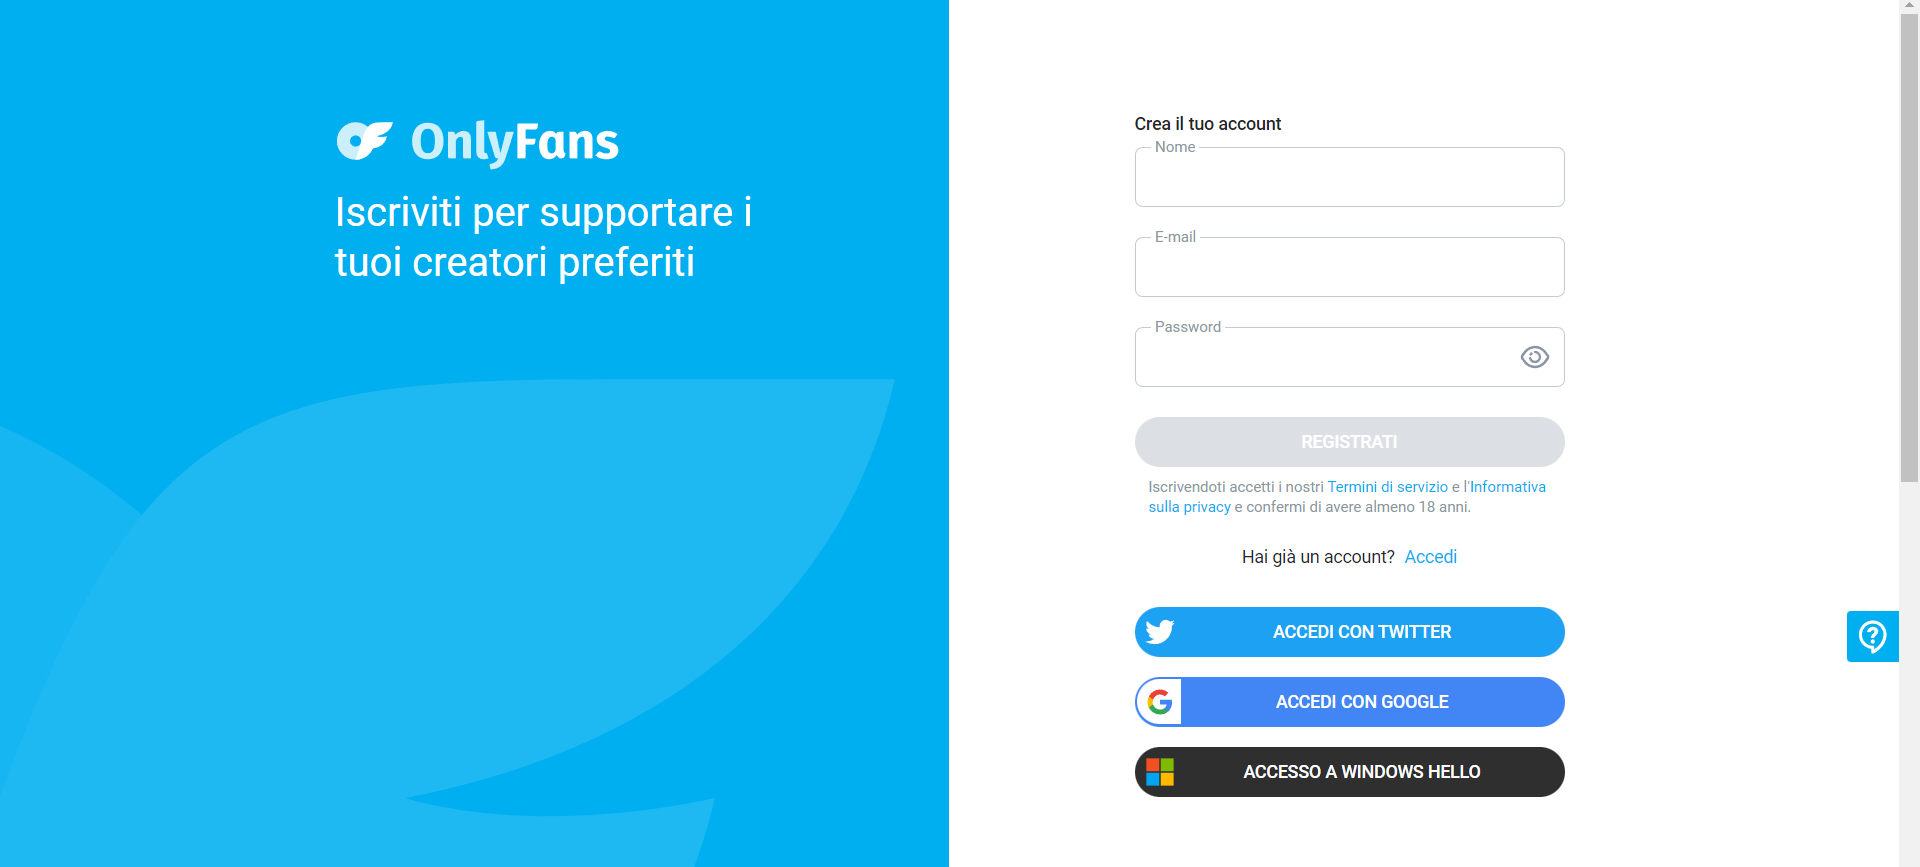 Iscriversi a OnlyFans con l'email